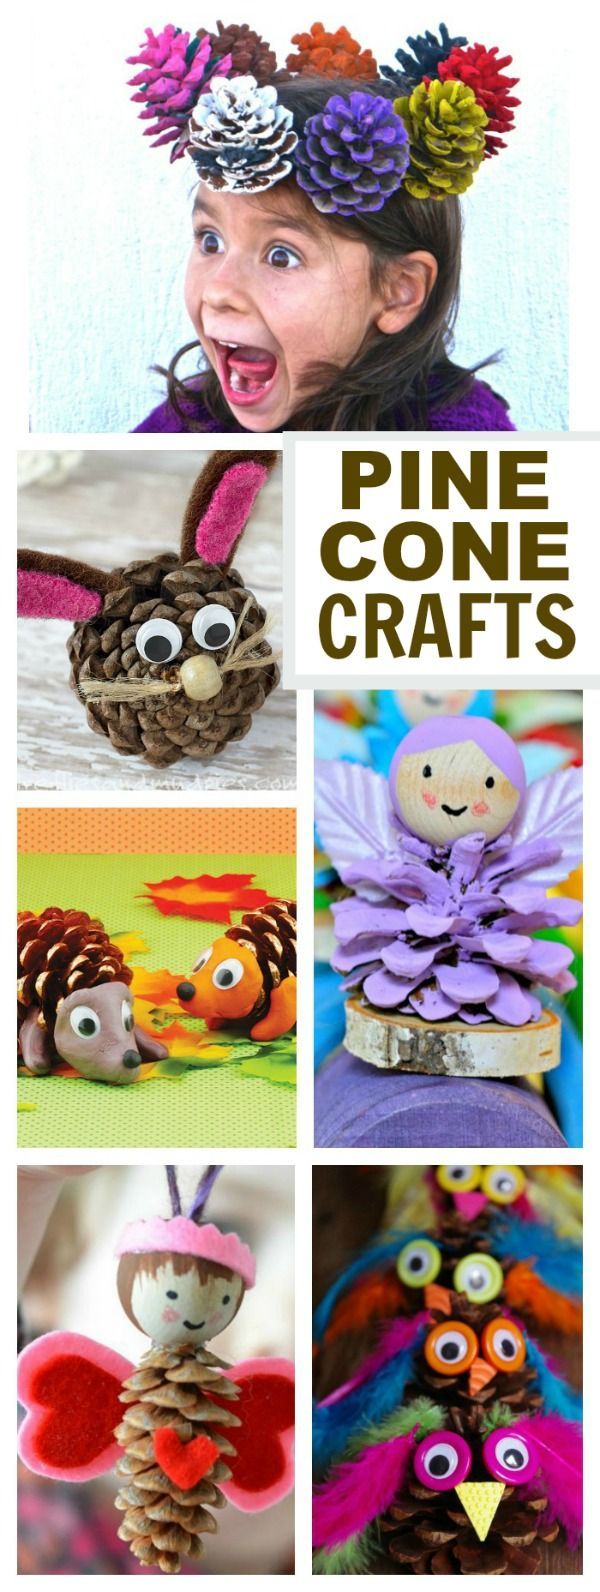 Pine Cone Crafts for Kids -   25 pinecone crafts for children
 ideas